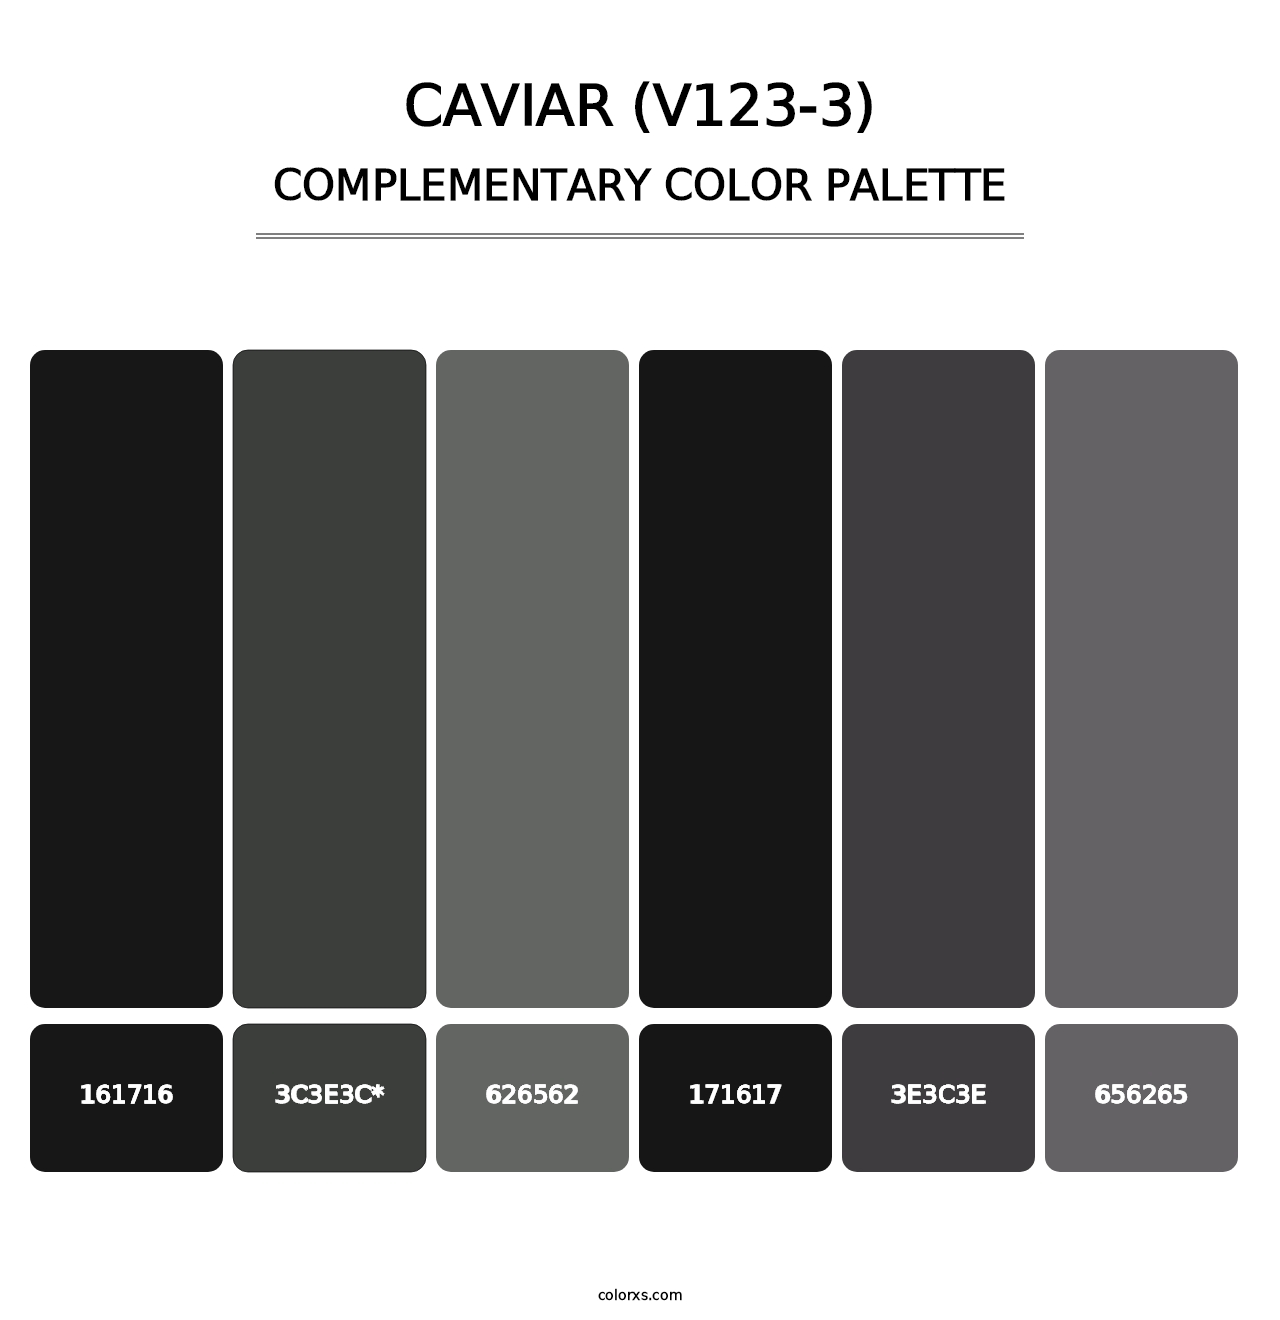 Caviar (V123-3) - Complementary Color Palette